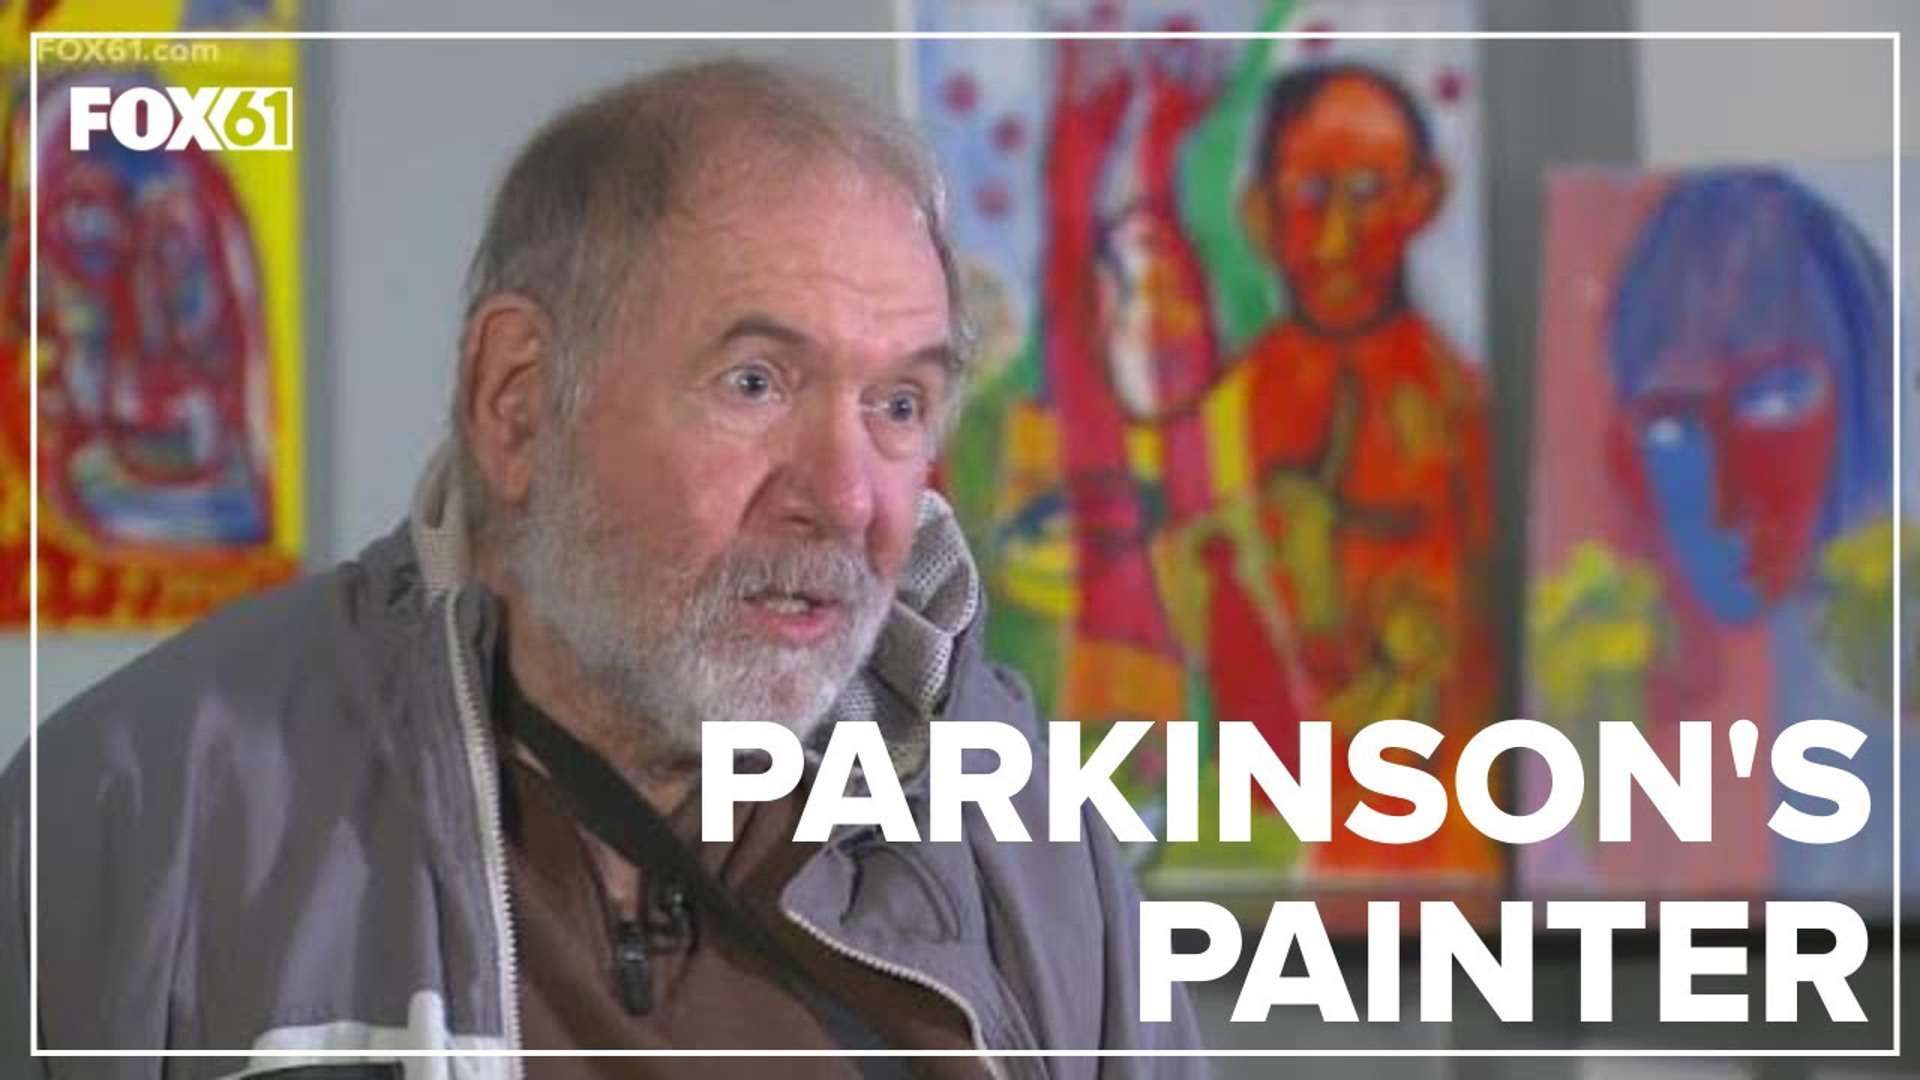 The self-proclaimed “Parkinson’s Painter” is on a mission to create art.